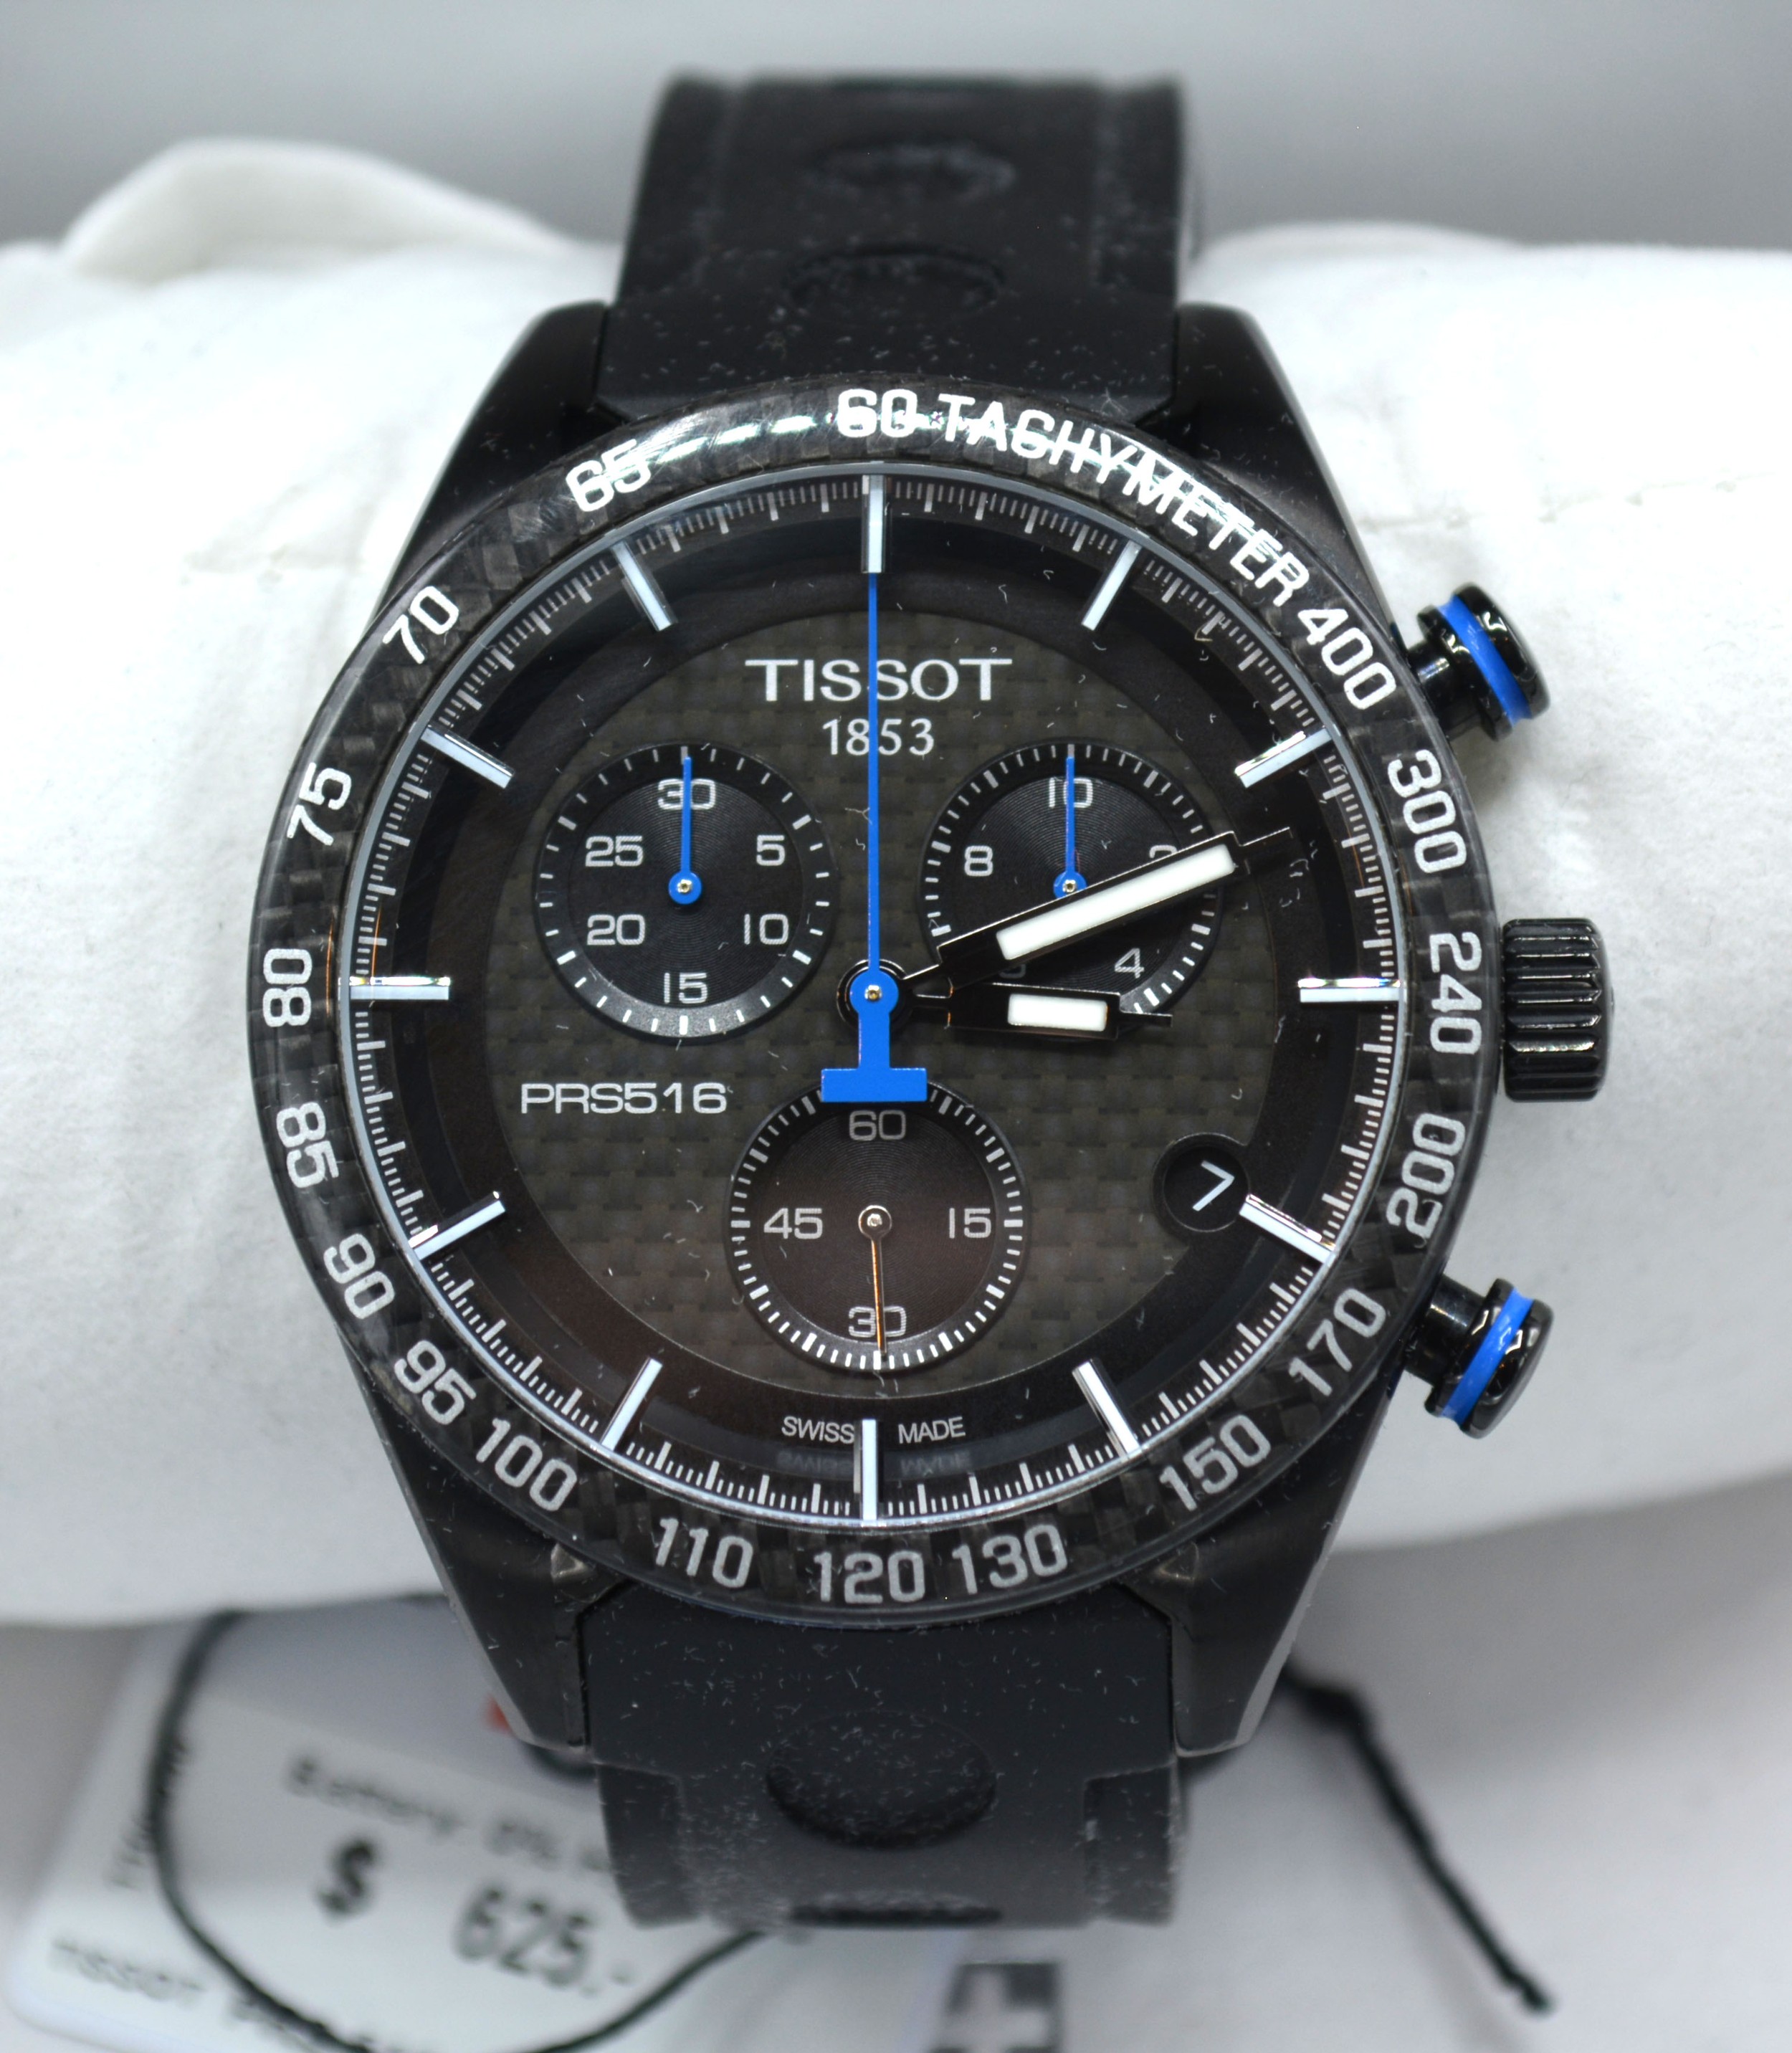 A Tissot PRS 516 Chronograph Wrist Watch with racing style strap complete with original box